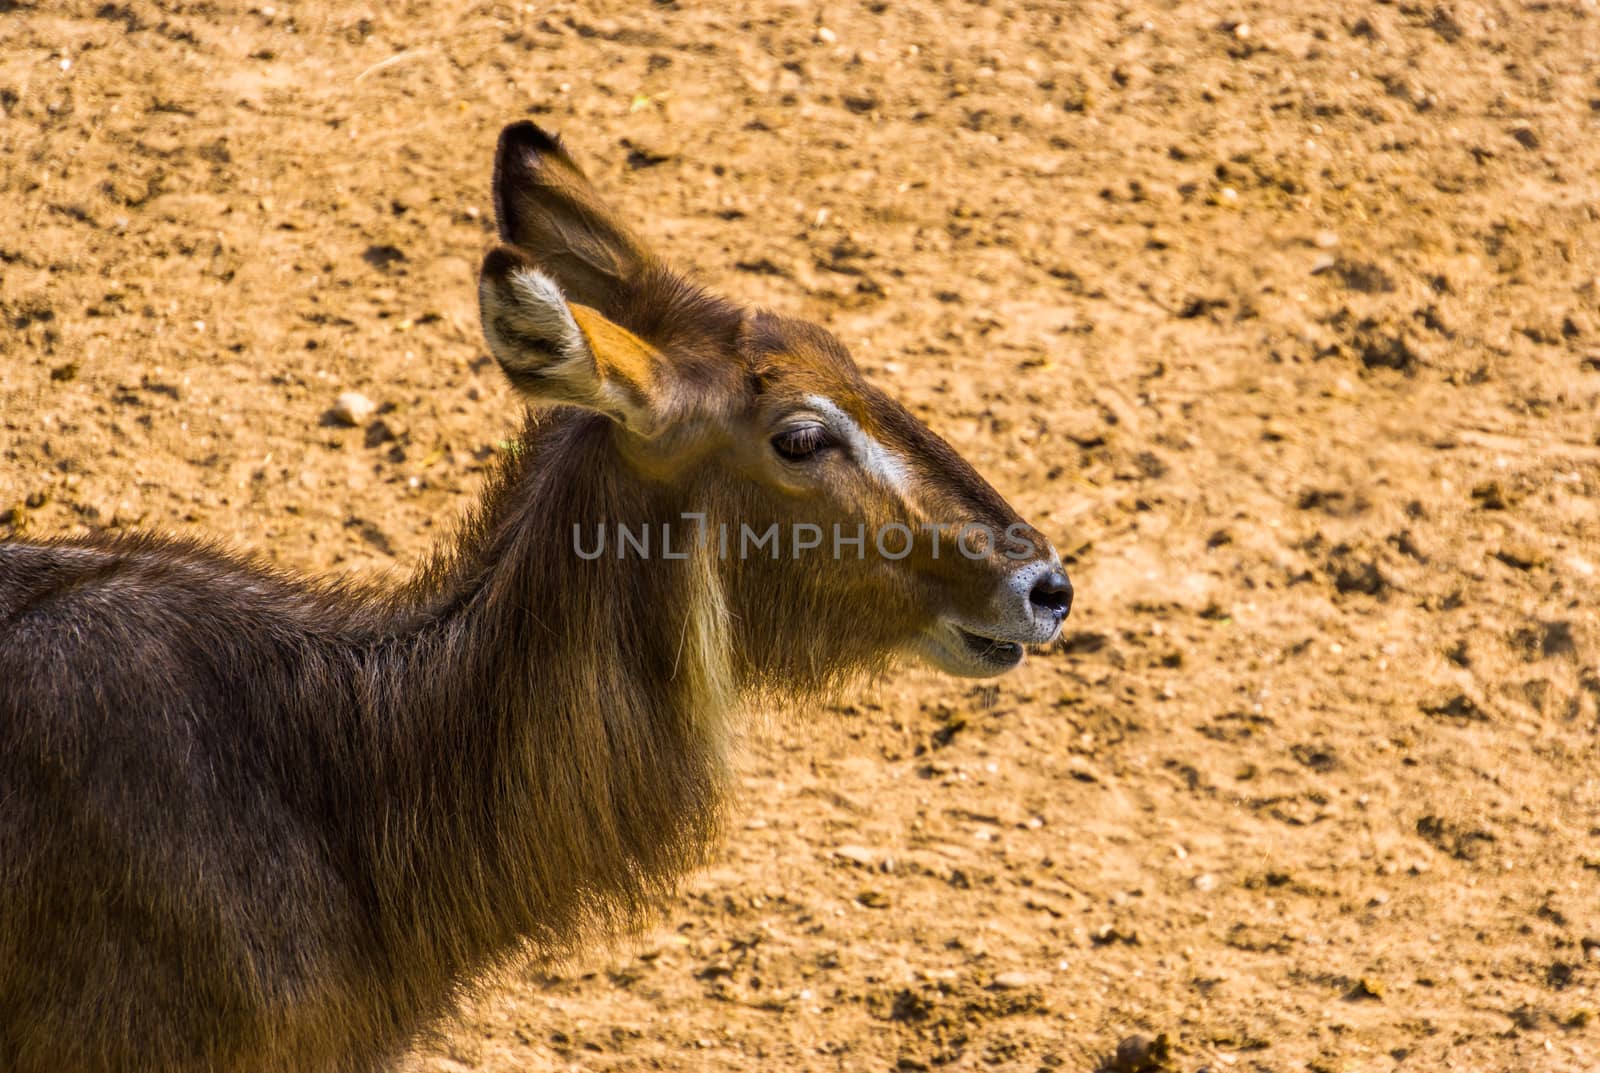 closeup of the face of a ellipsen waterbuck, tropical antelope specie from Africa by charlottebleijenberg